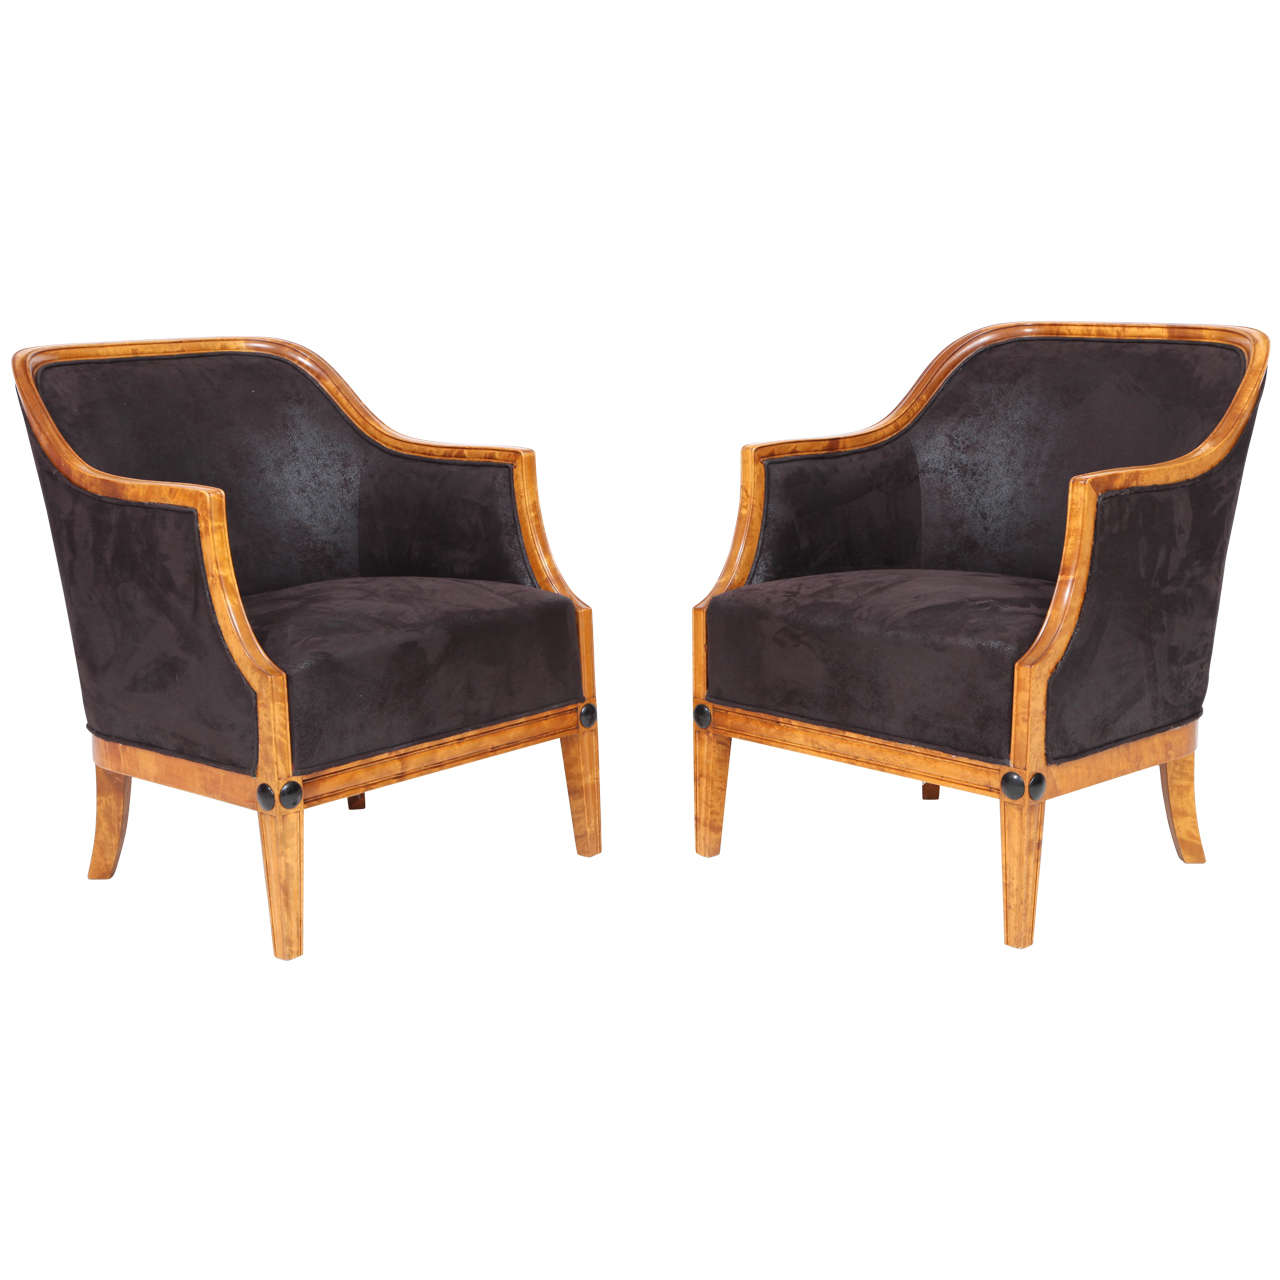 Pair of Swedish Curved Back Armchairs